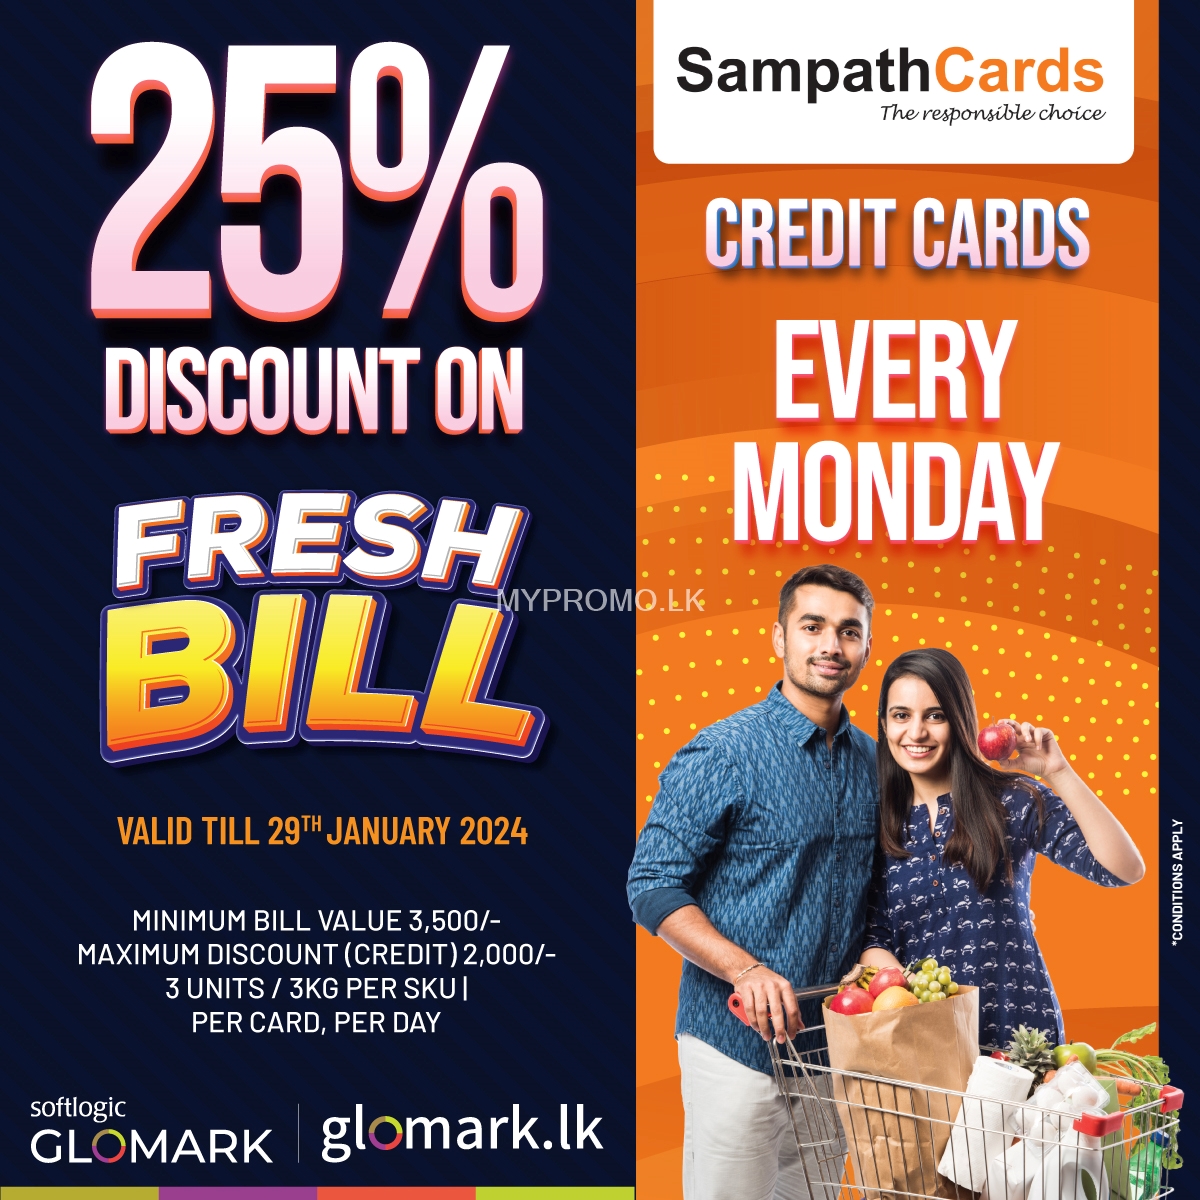 Enjoy up to 25% off with Sampath Bank Cards at Softlogic GLOMARK